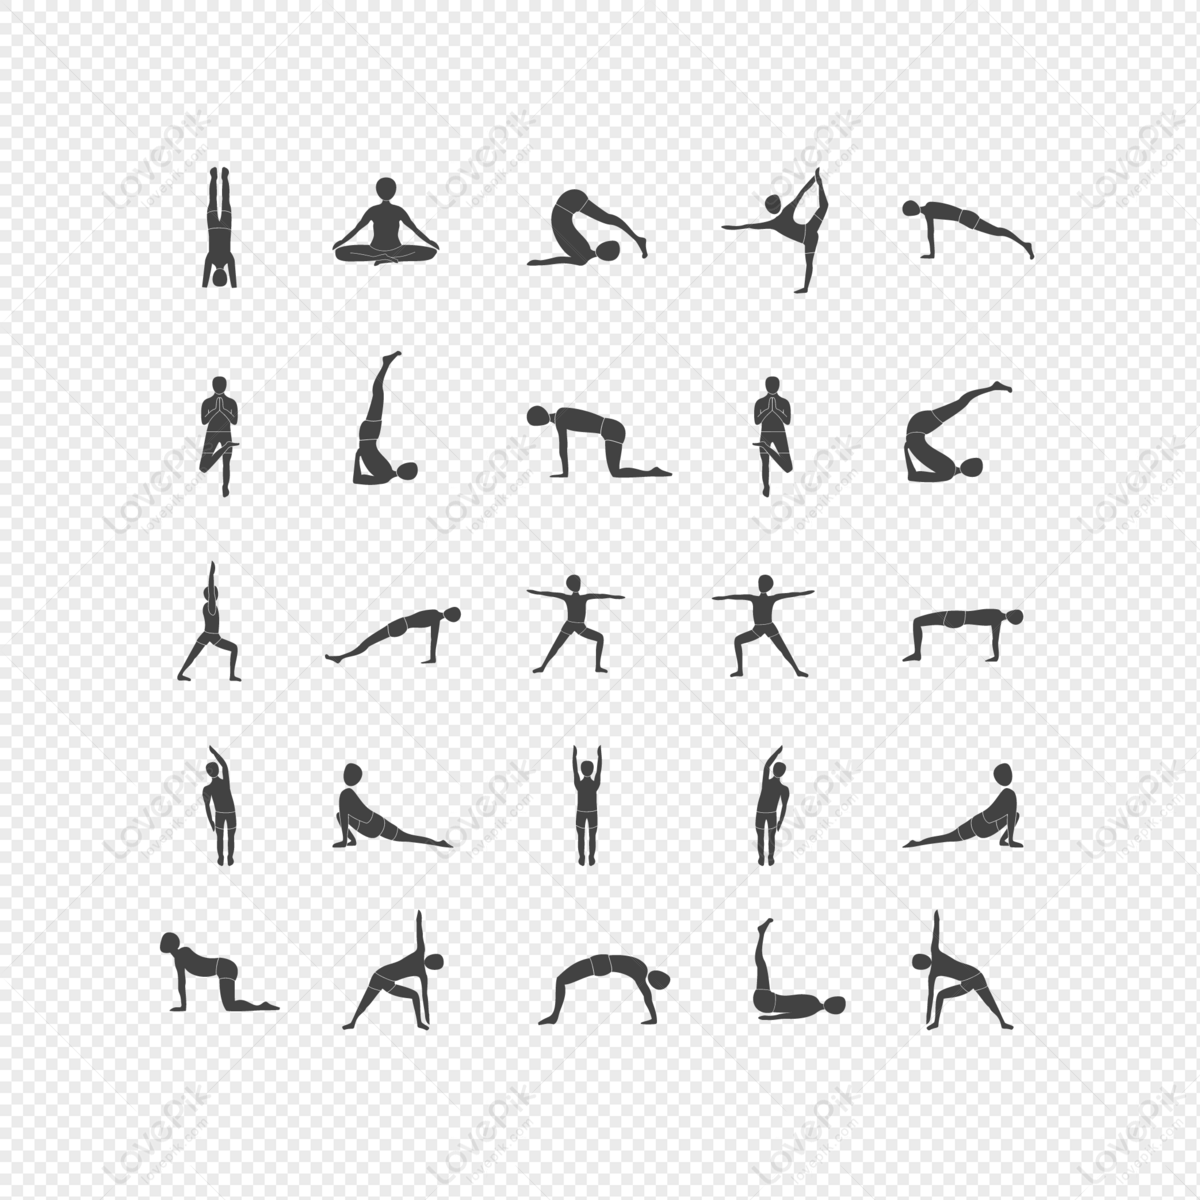 Fitness Poses Images - Free Download on Freepik